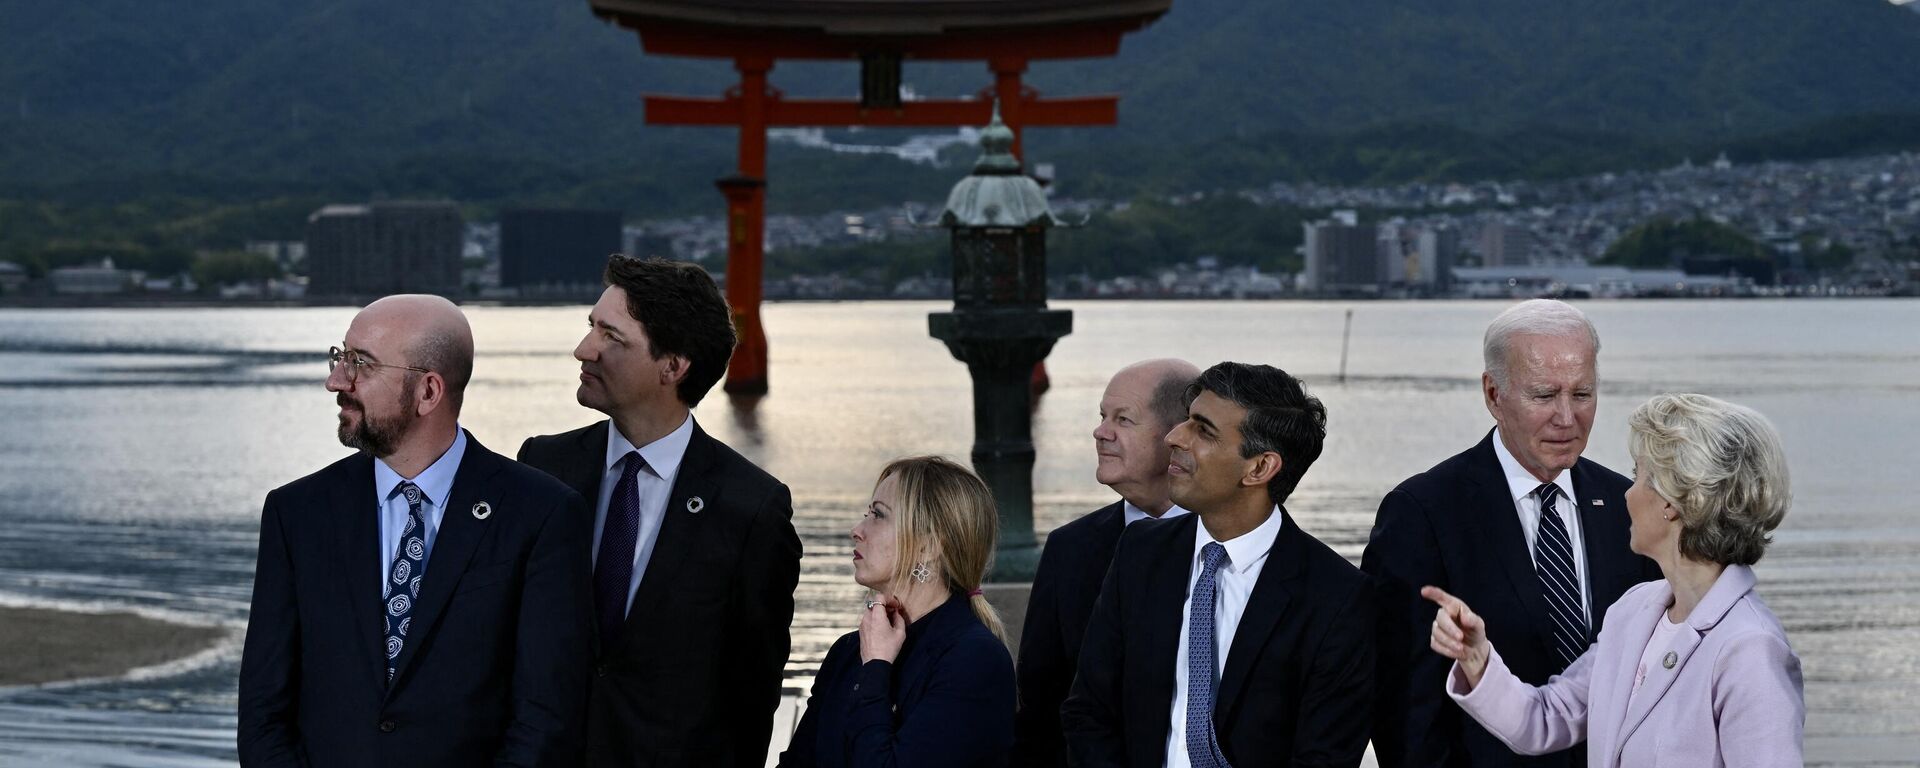 (L-R) President of the European Council Charles Michel, Canada's Prime Minister Justin Trudeau, Italy's Prime Minister Giorgia Meloni, Germany's Chancellor Olaf Scholz, Britain's Prime Minister Rishi Sunak, US President Joe Biden and European Commission President Ursula von der Leyen visit the Itsukushima Shrine on Miyajima Island in Hatsukaichi on May 19, 2023, during the G7 Leaders' Summit being held in Hiroshima. - Sputnik India, 1920, 20.05.2023